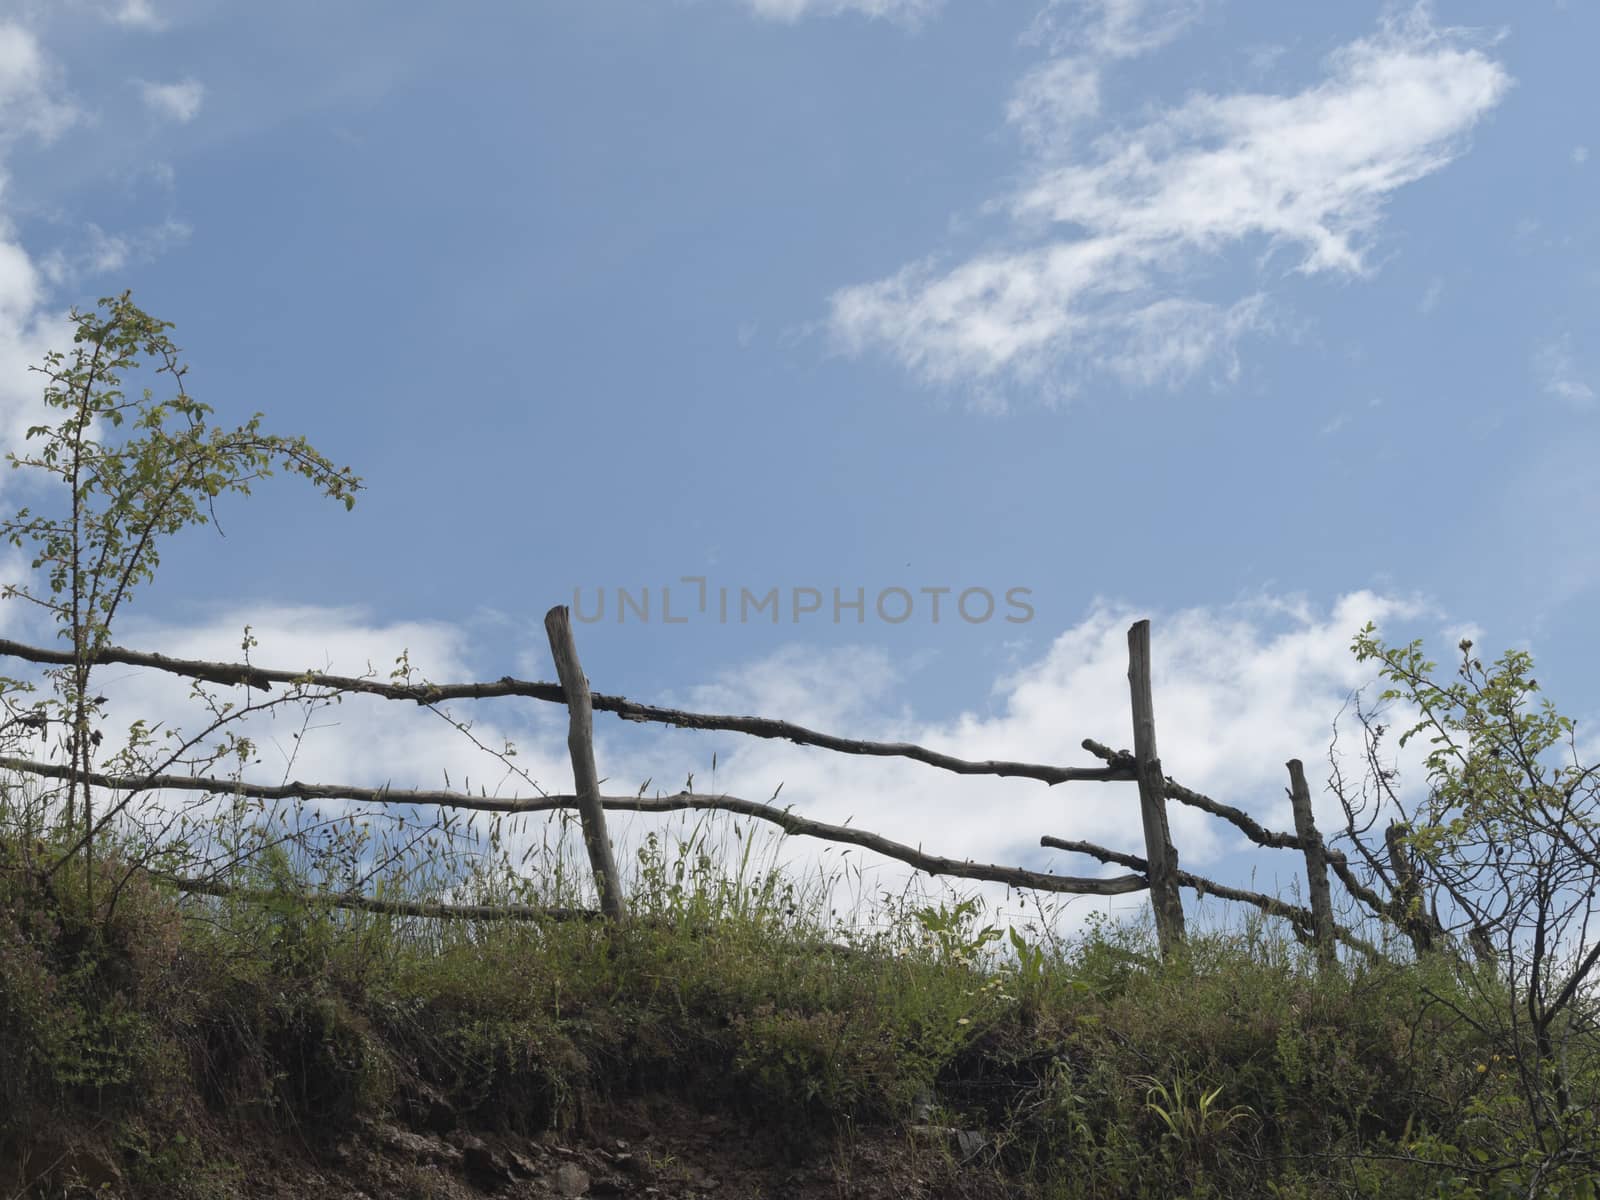 Sky, clouds and old wooden fence near the road